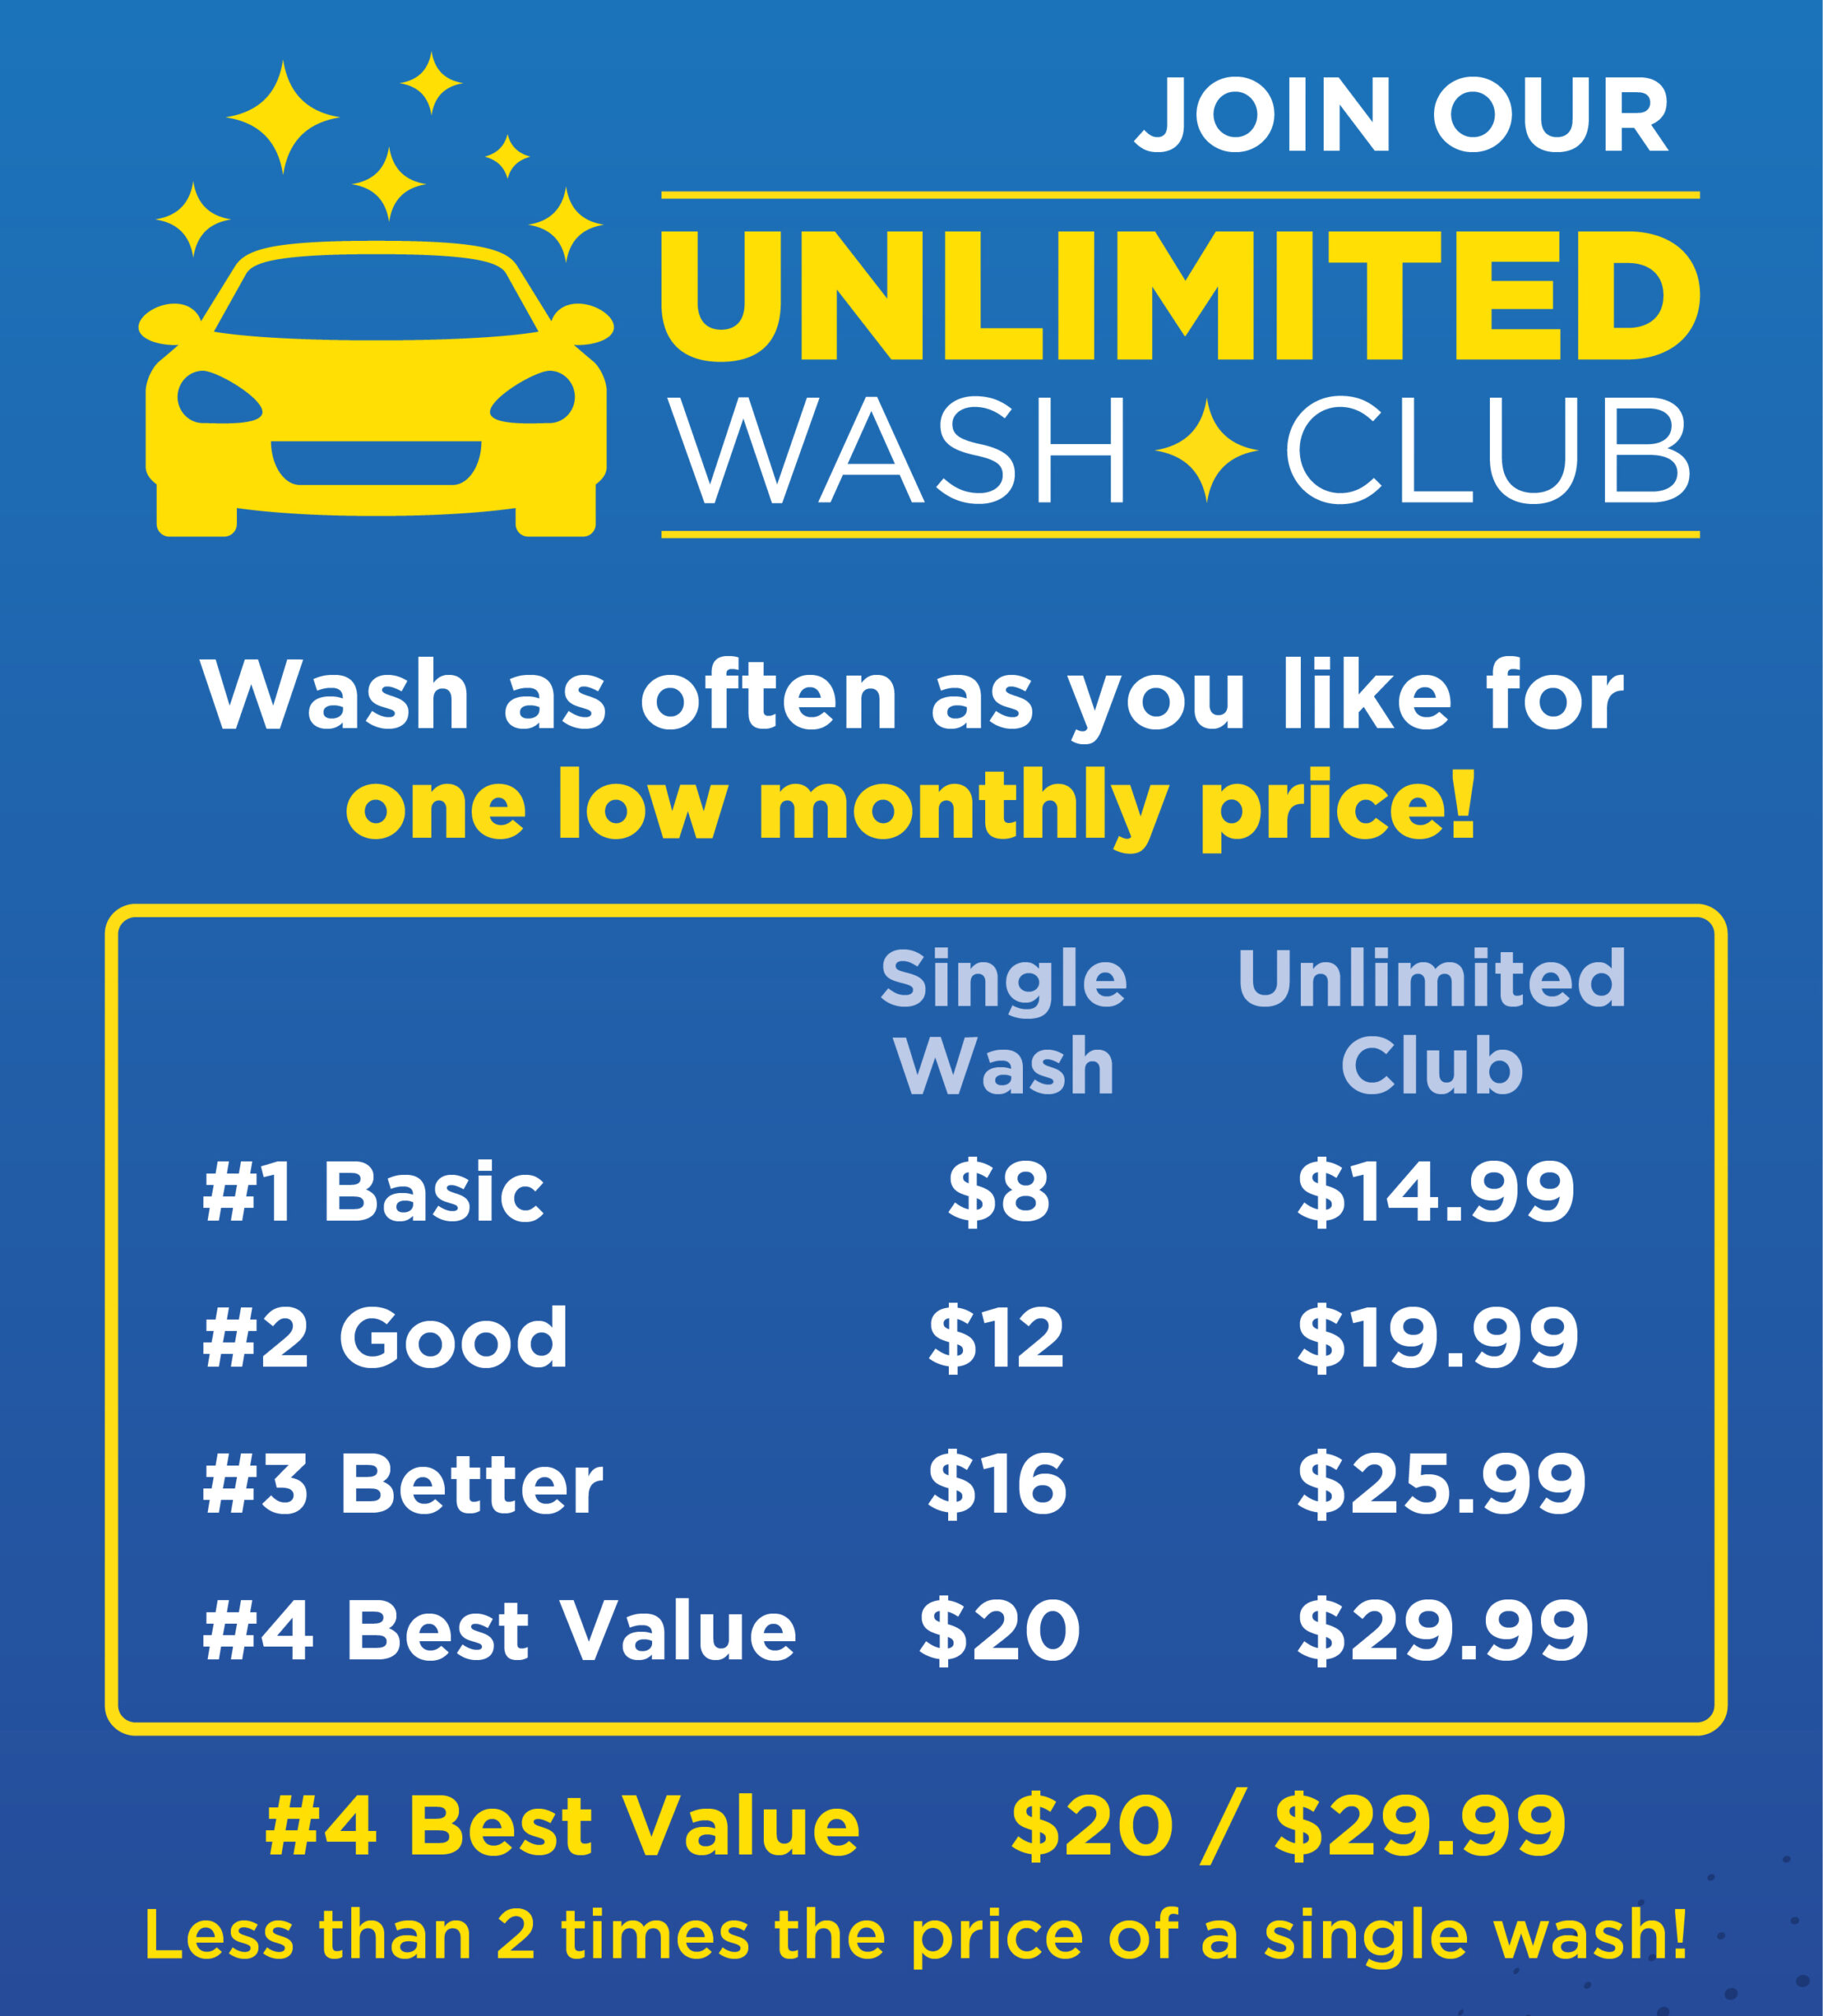 Unlimited Wash Pricing: Basic $14.99 per month, Good $19.99 per month, Better $25.95 per month, Best Value $29.99 per month